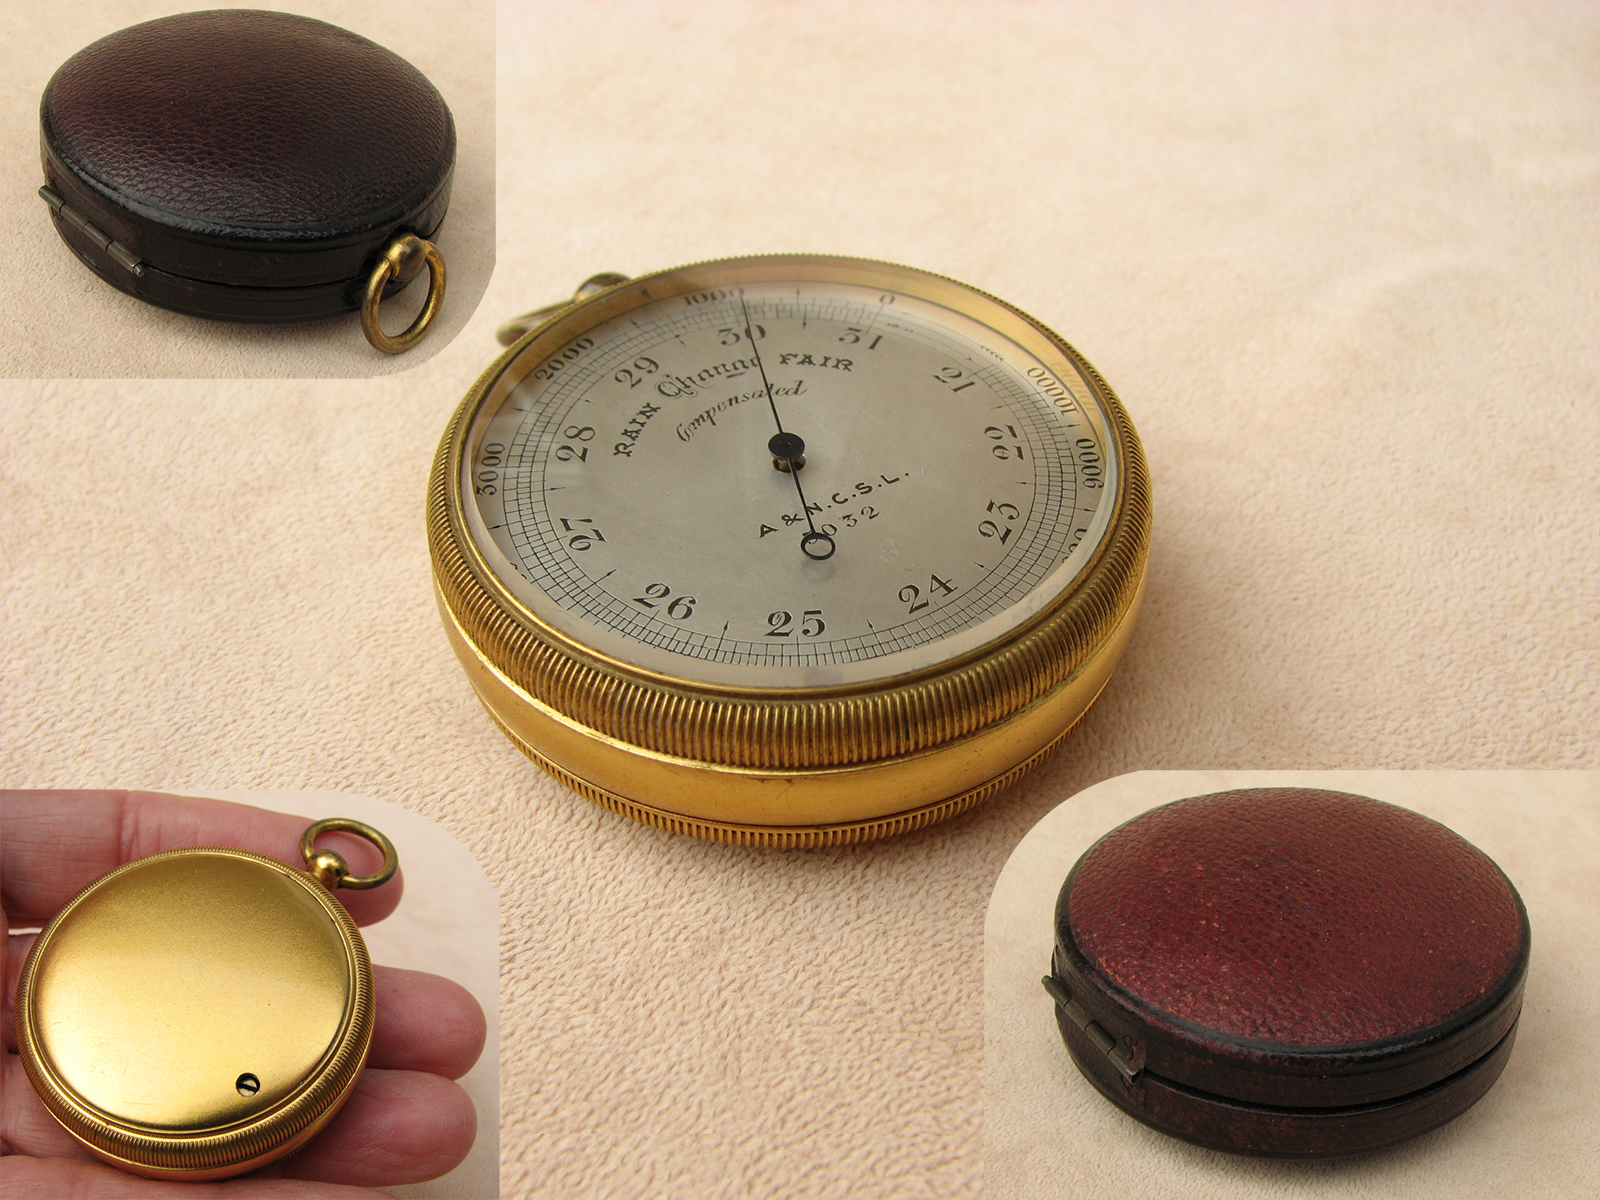 Compensated A.& N.C.S.L pocket barometer and altimeter in case No 5032